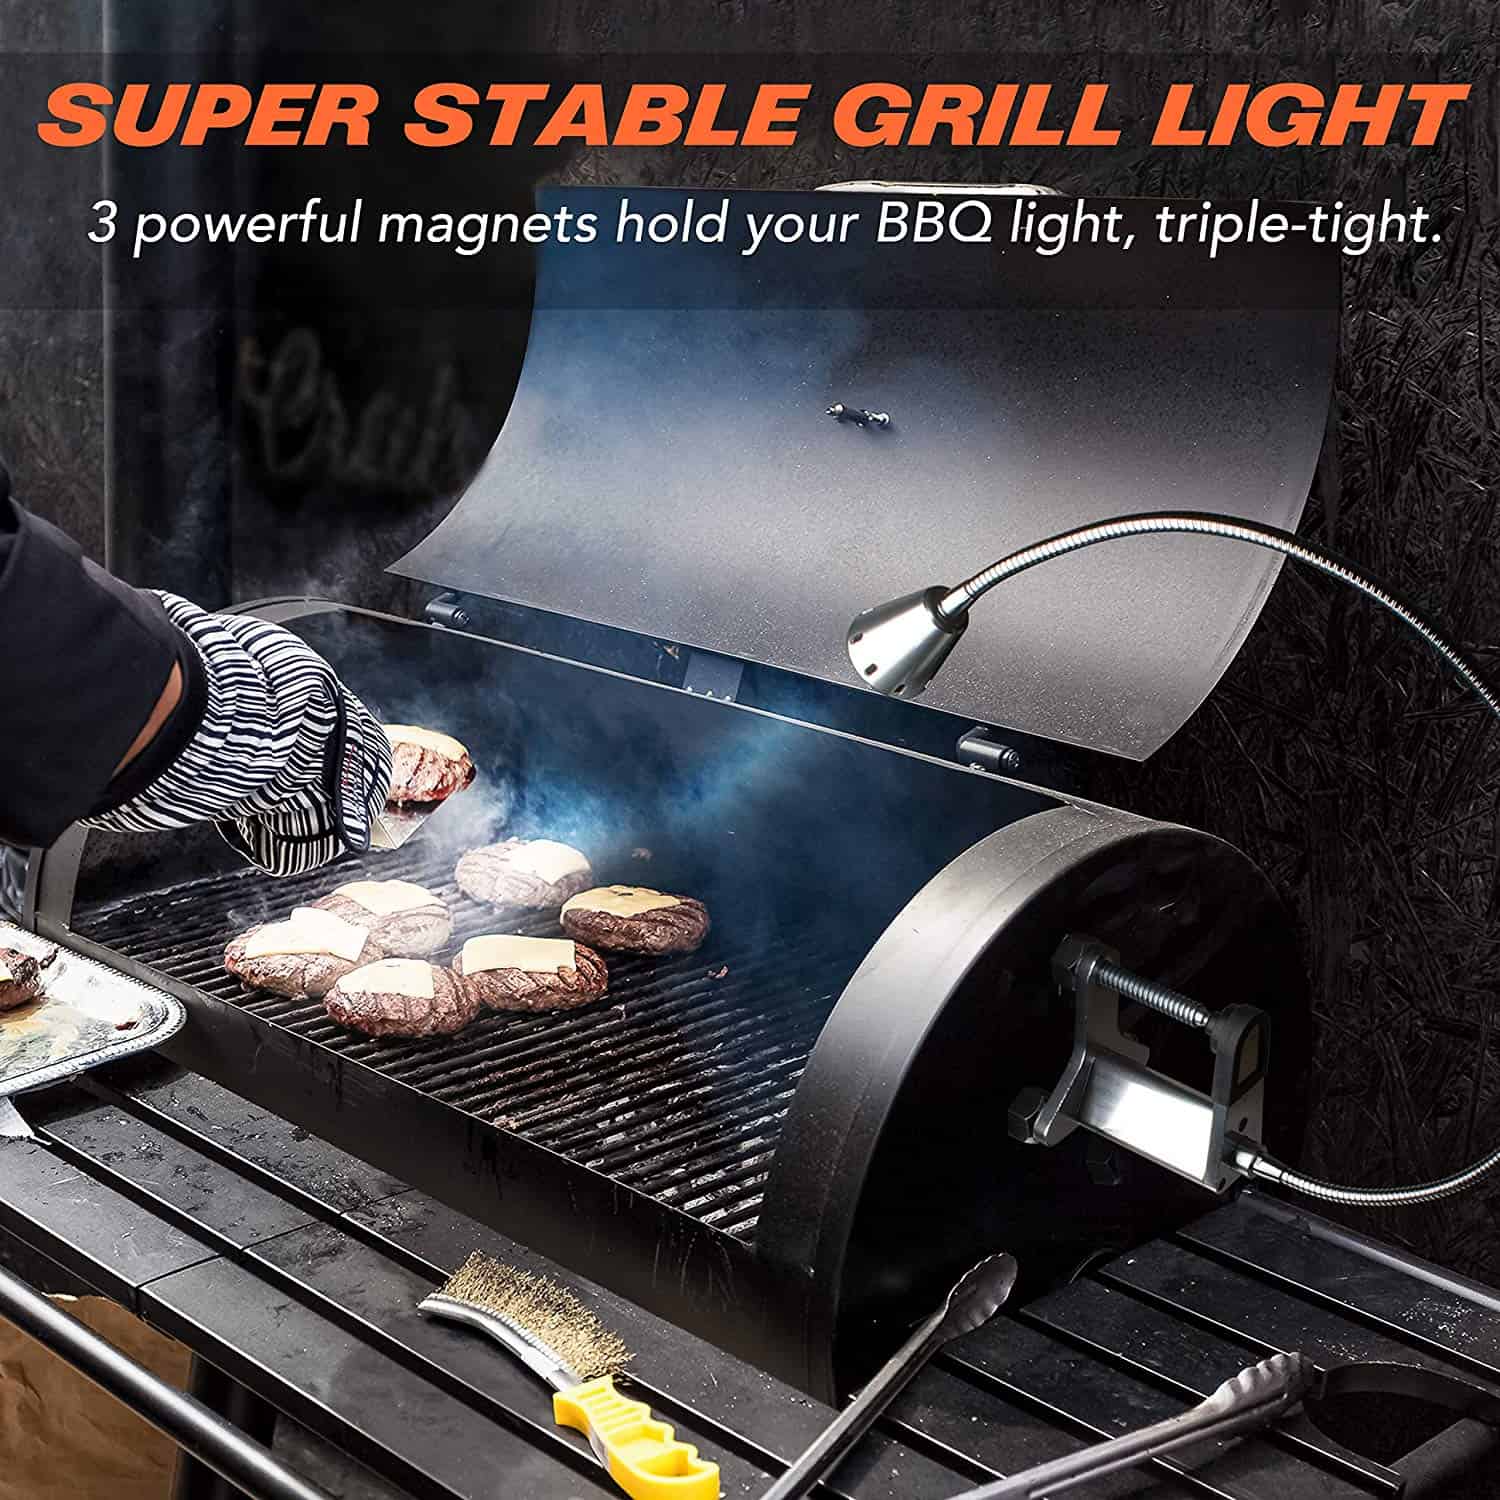 Magnetic grill light